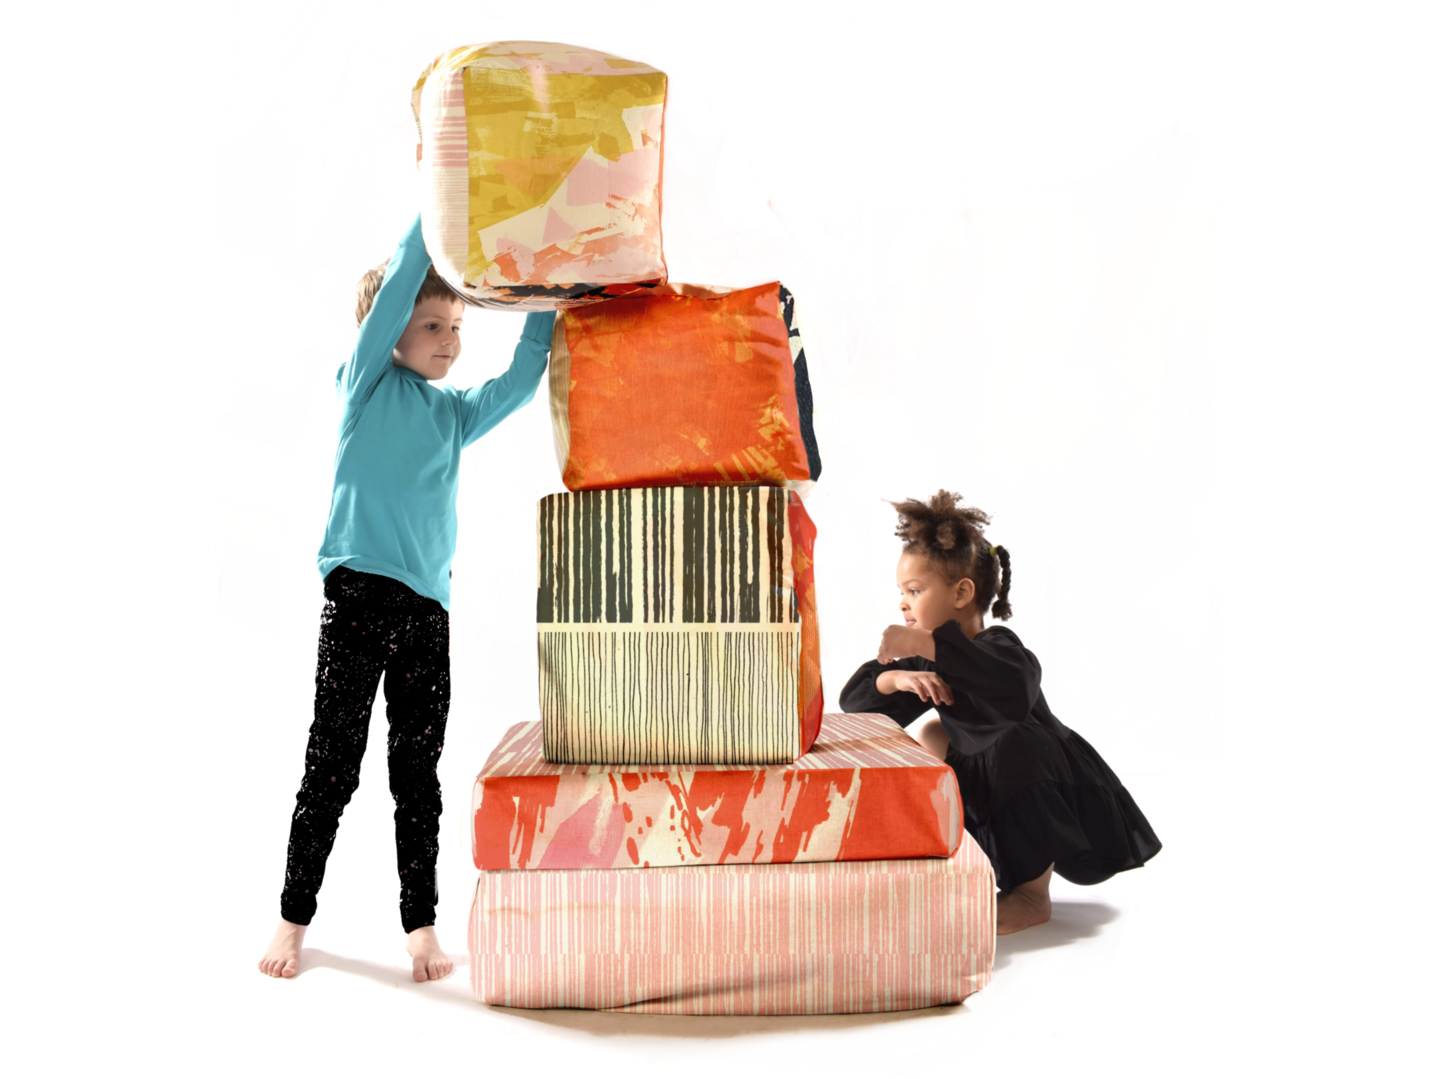 Two children play with the textile cubes, stacking them up.